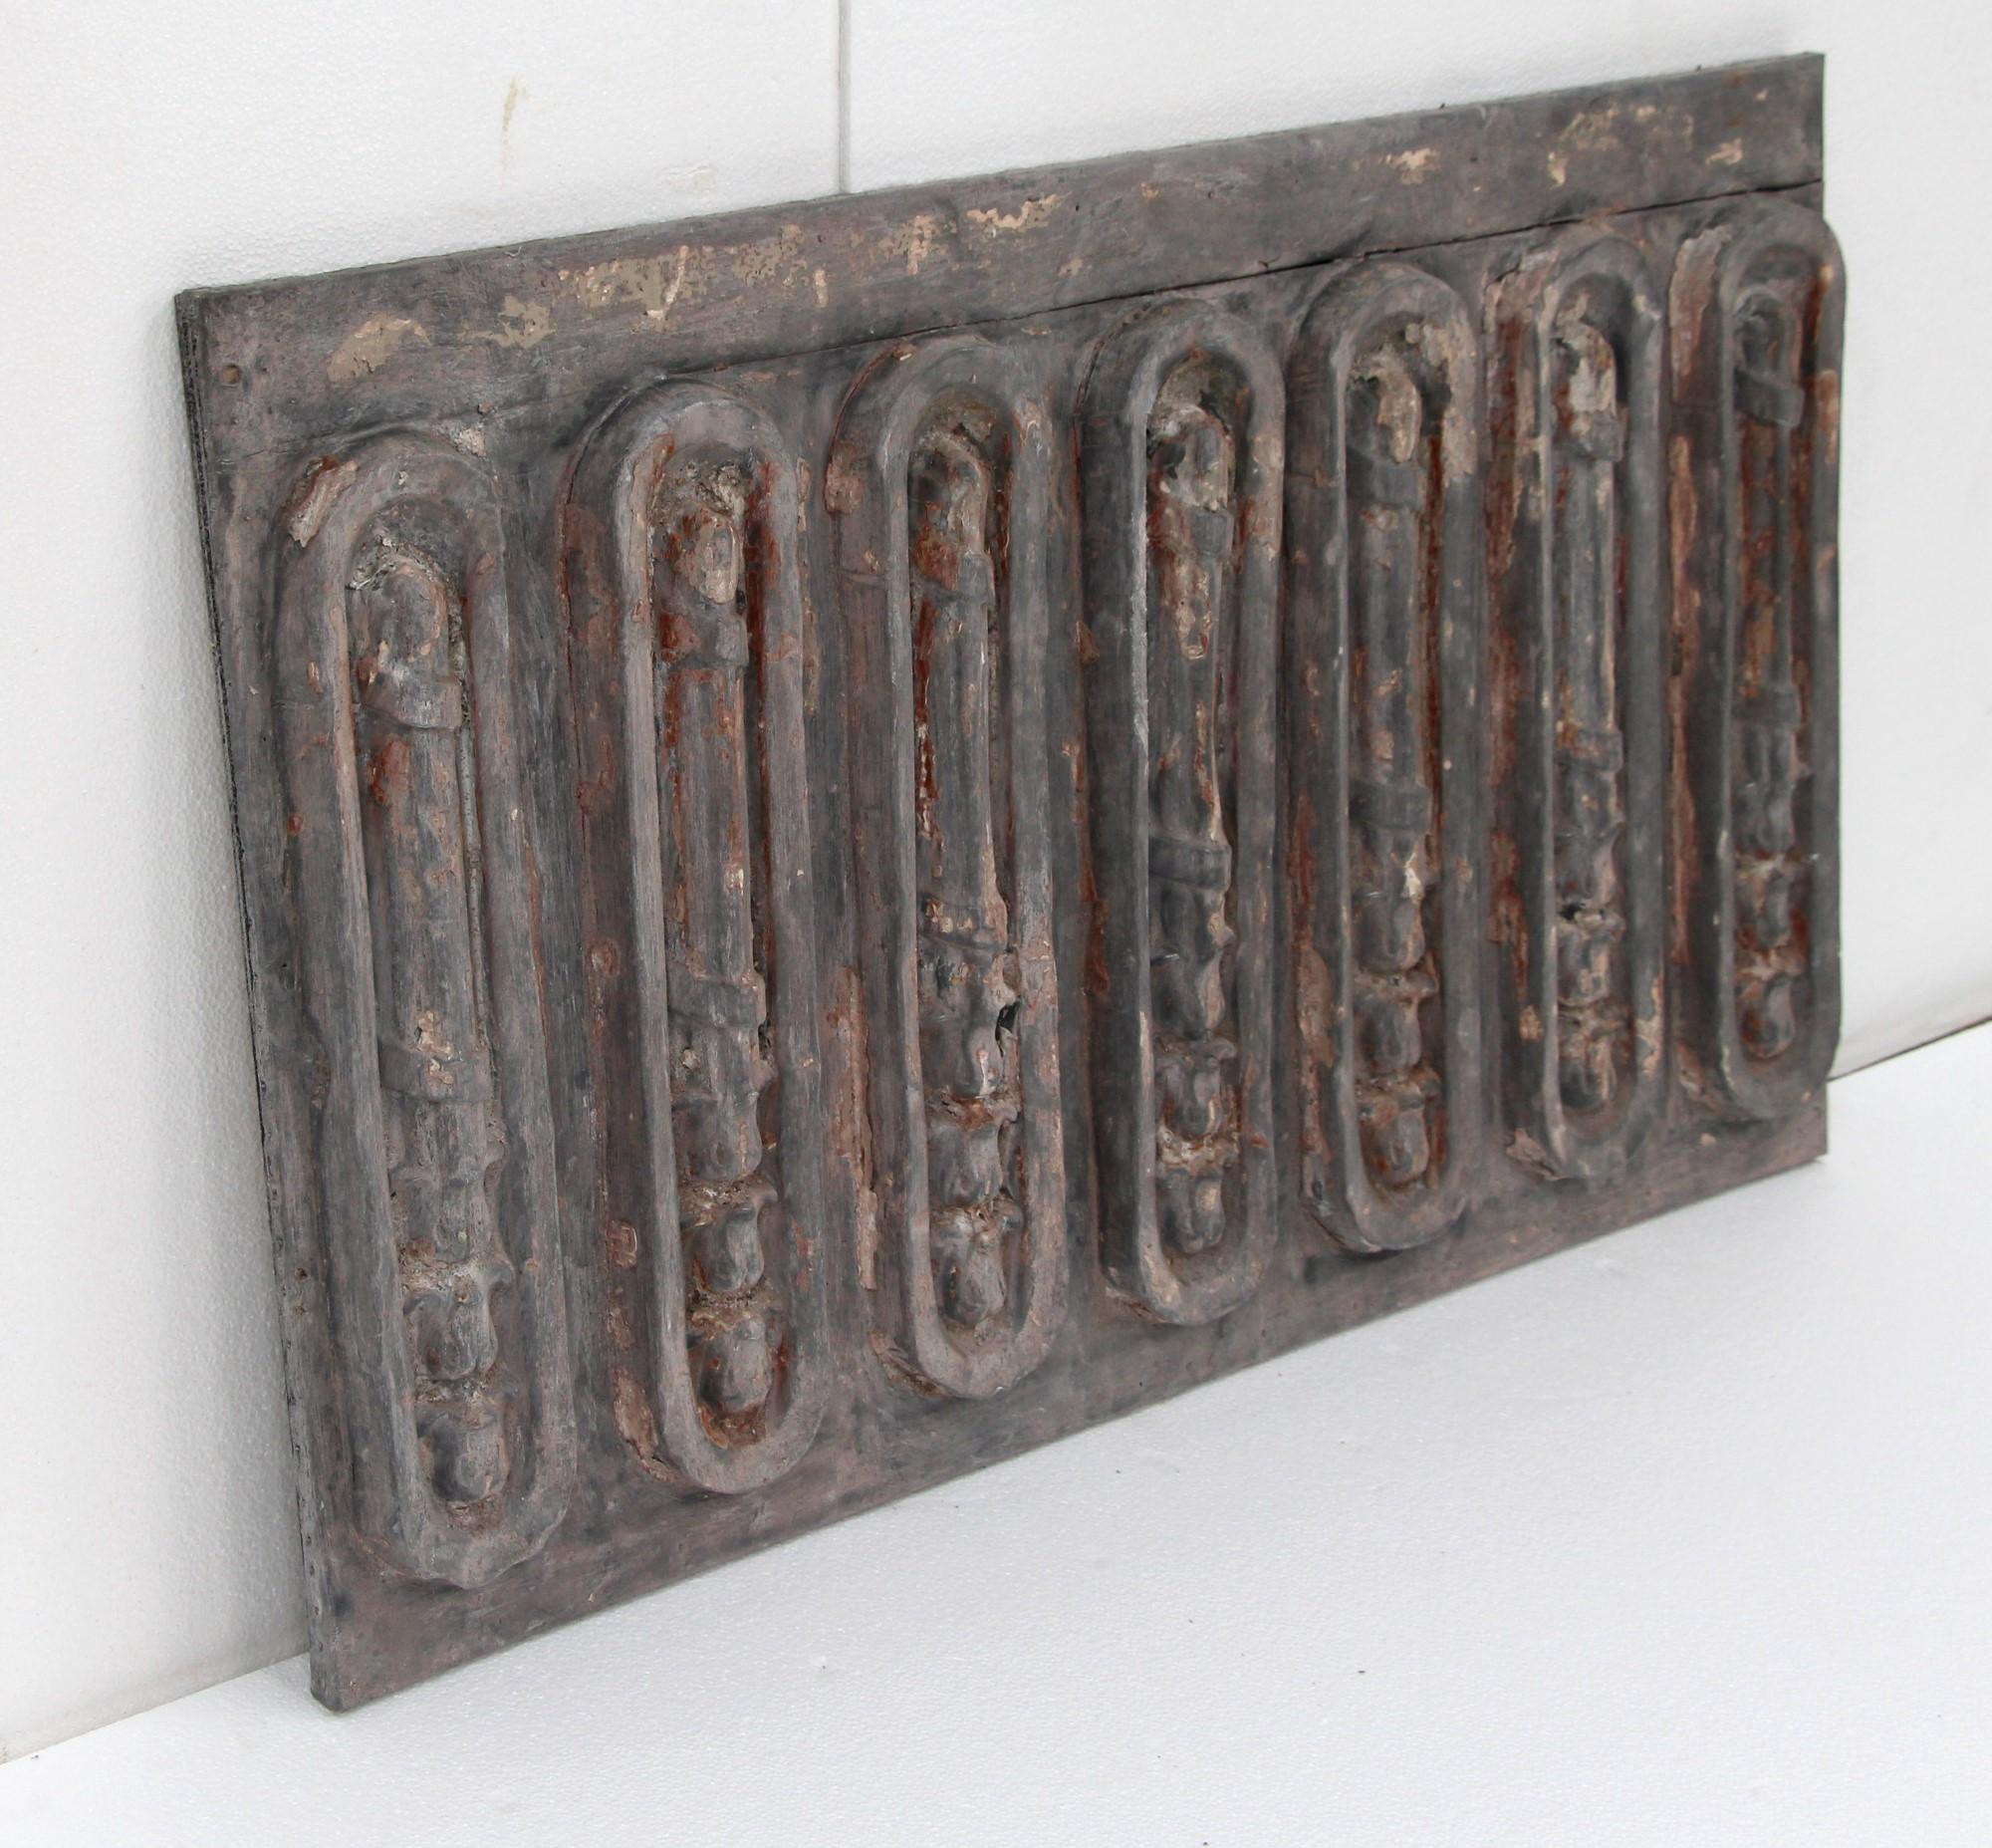 Raised decorative zinc panel wall mount retrived from a 1920s New York City building on the northwest corner of 5th Ave and West 43rd St. Mounted on a wood frame. This would make a great decorative piece for over a mantel or on a wall. One